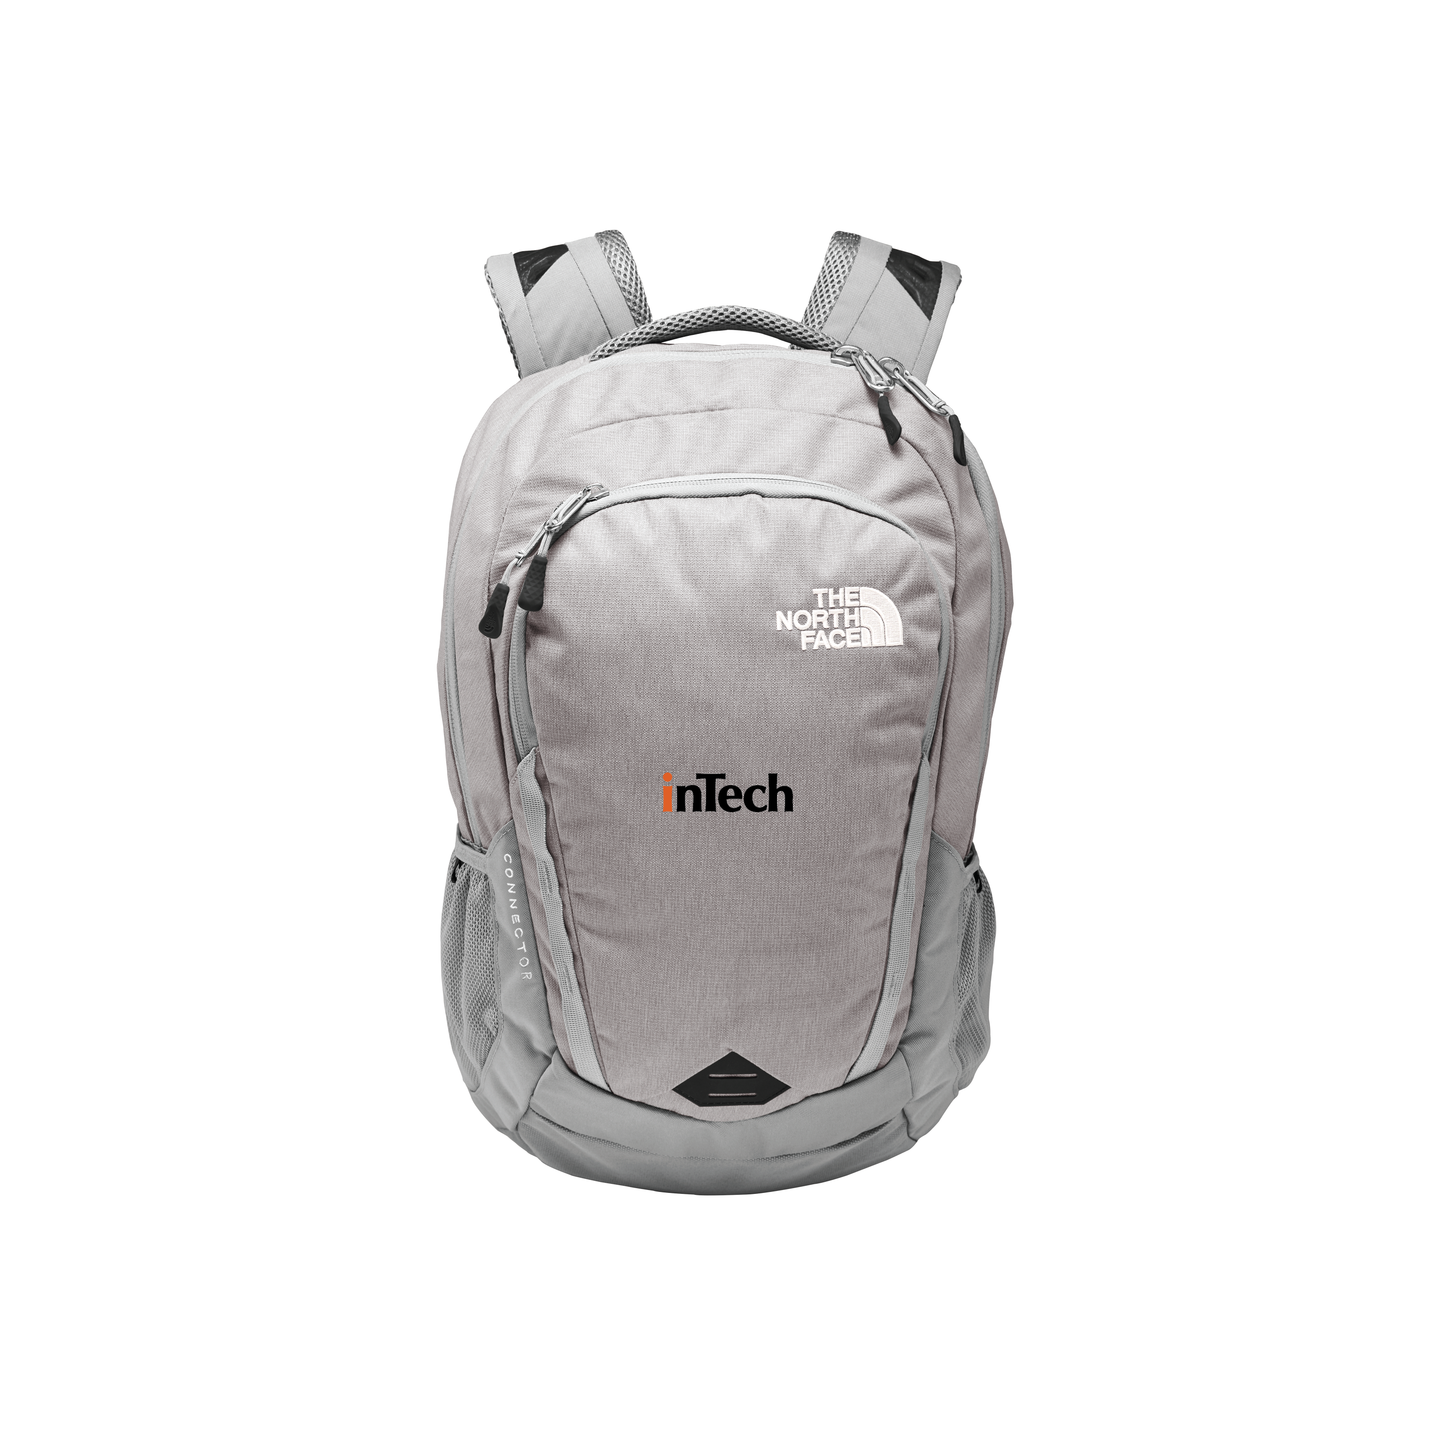 NF0A3KX8  The North Face ® Connector Backpack